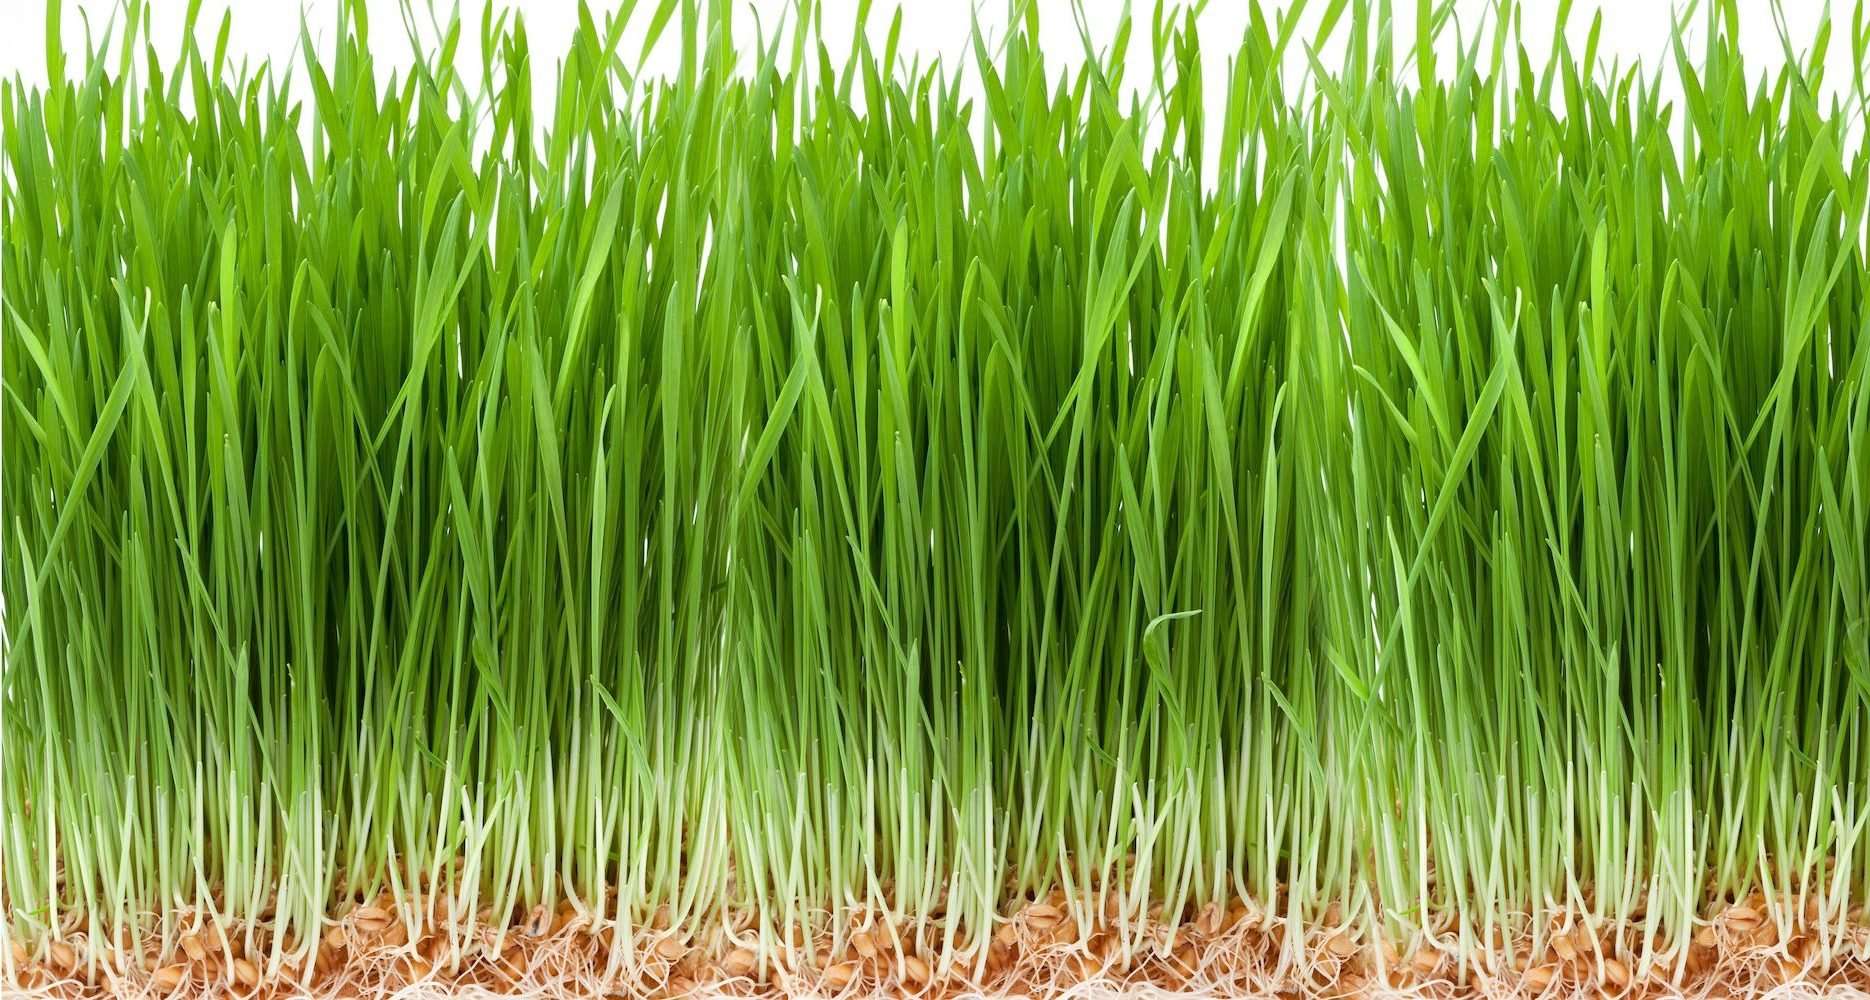 Close up photo of wheat grass from the side